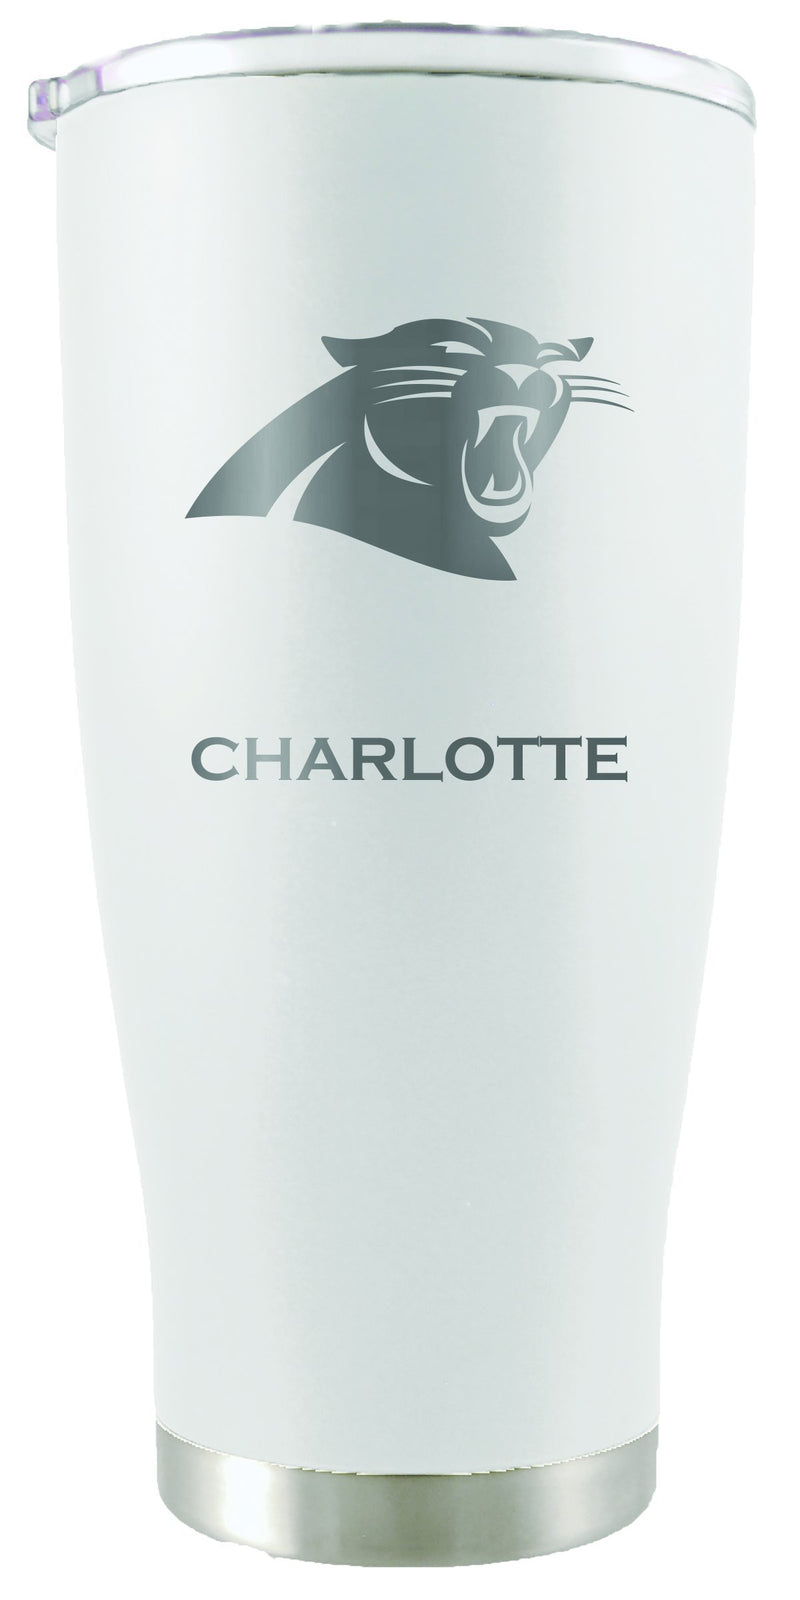 20oz White Personalized Stainless Steel Tumbler | Carolina Panthers
Carolina Panthers, CPA, CurrentProduct, Drinkware_category_All, NFL, Personalized_Personalized, Stainless Steel
The Memory Company